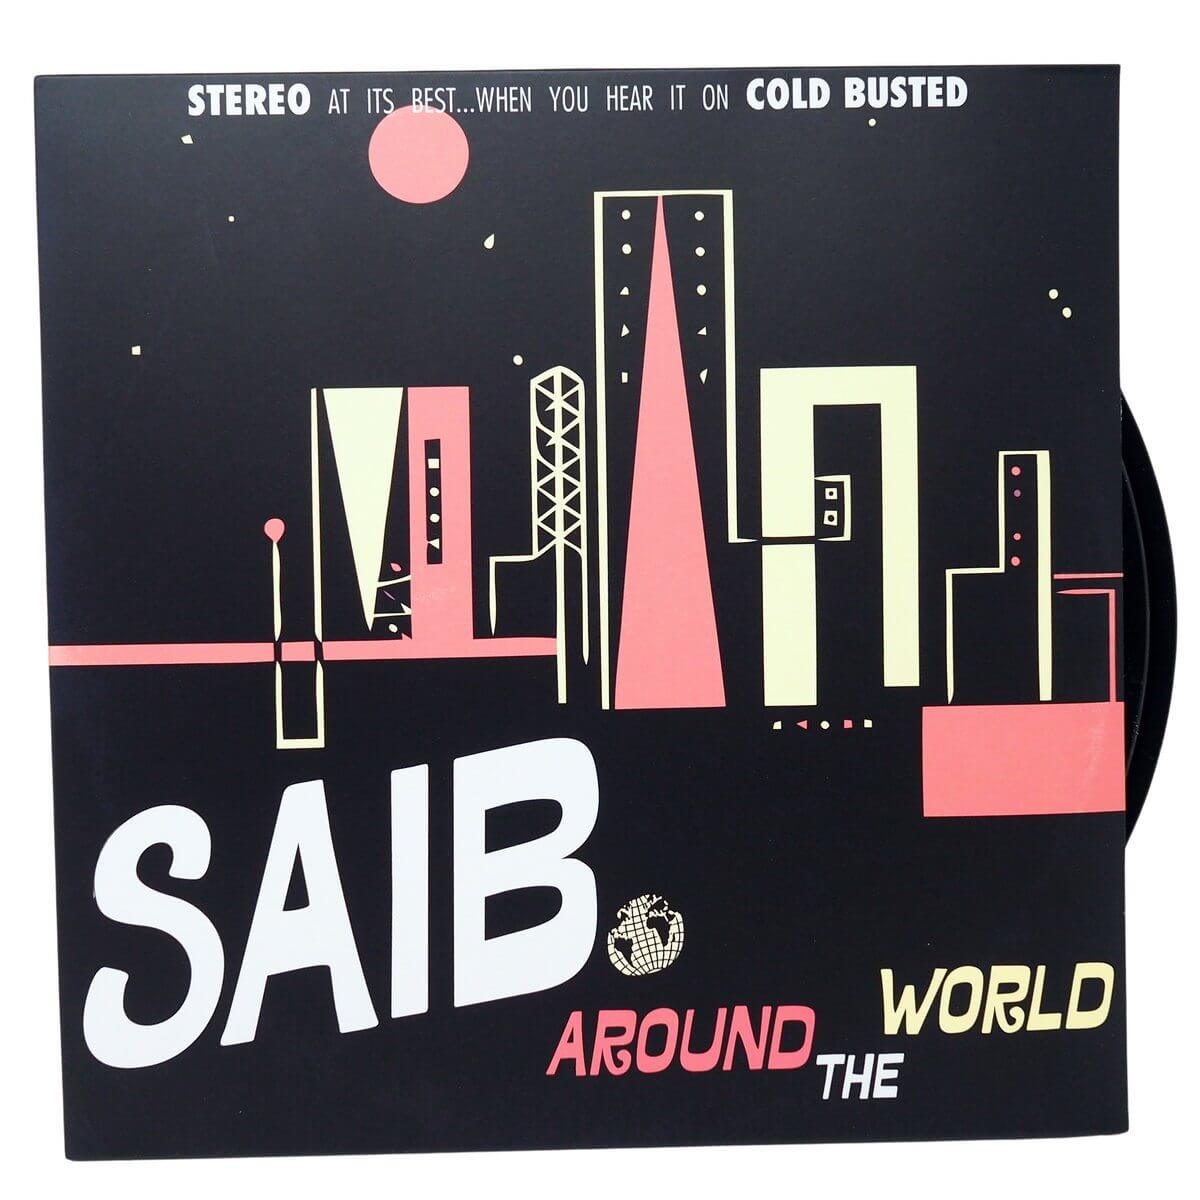 saib. - Around The World (Remastered) - Limited Edition Double 12 Inch Vinyl - Cold Busted